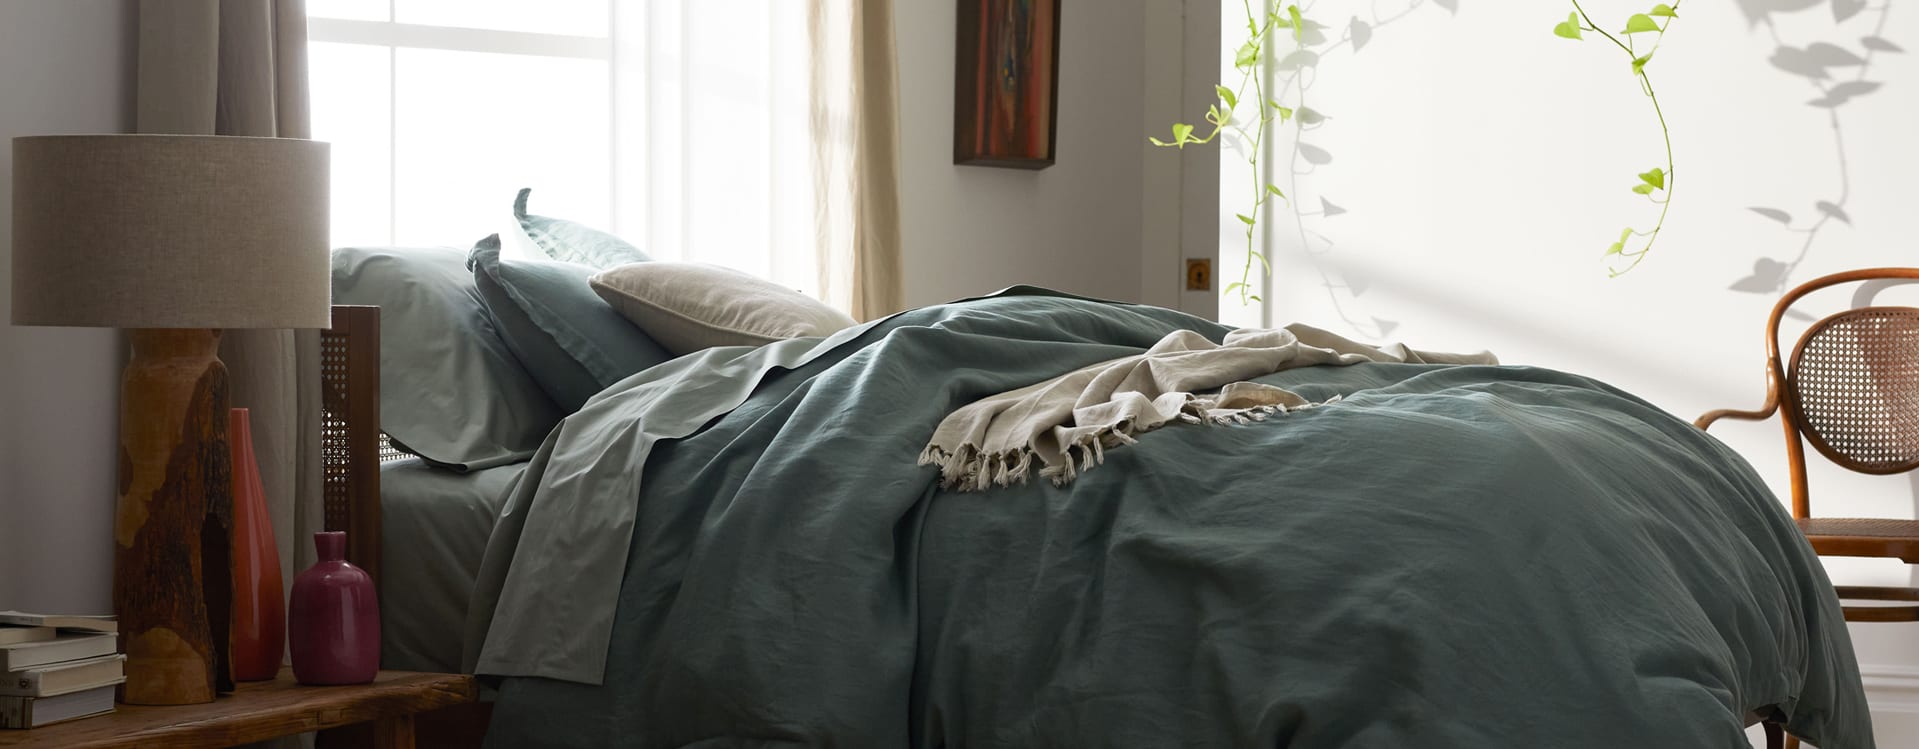 Why Choose High-Quality Bedding? Sheets